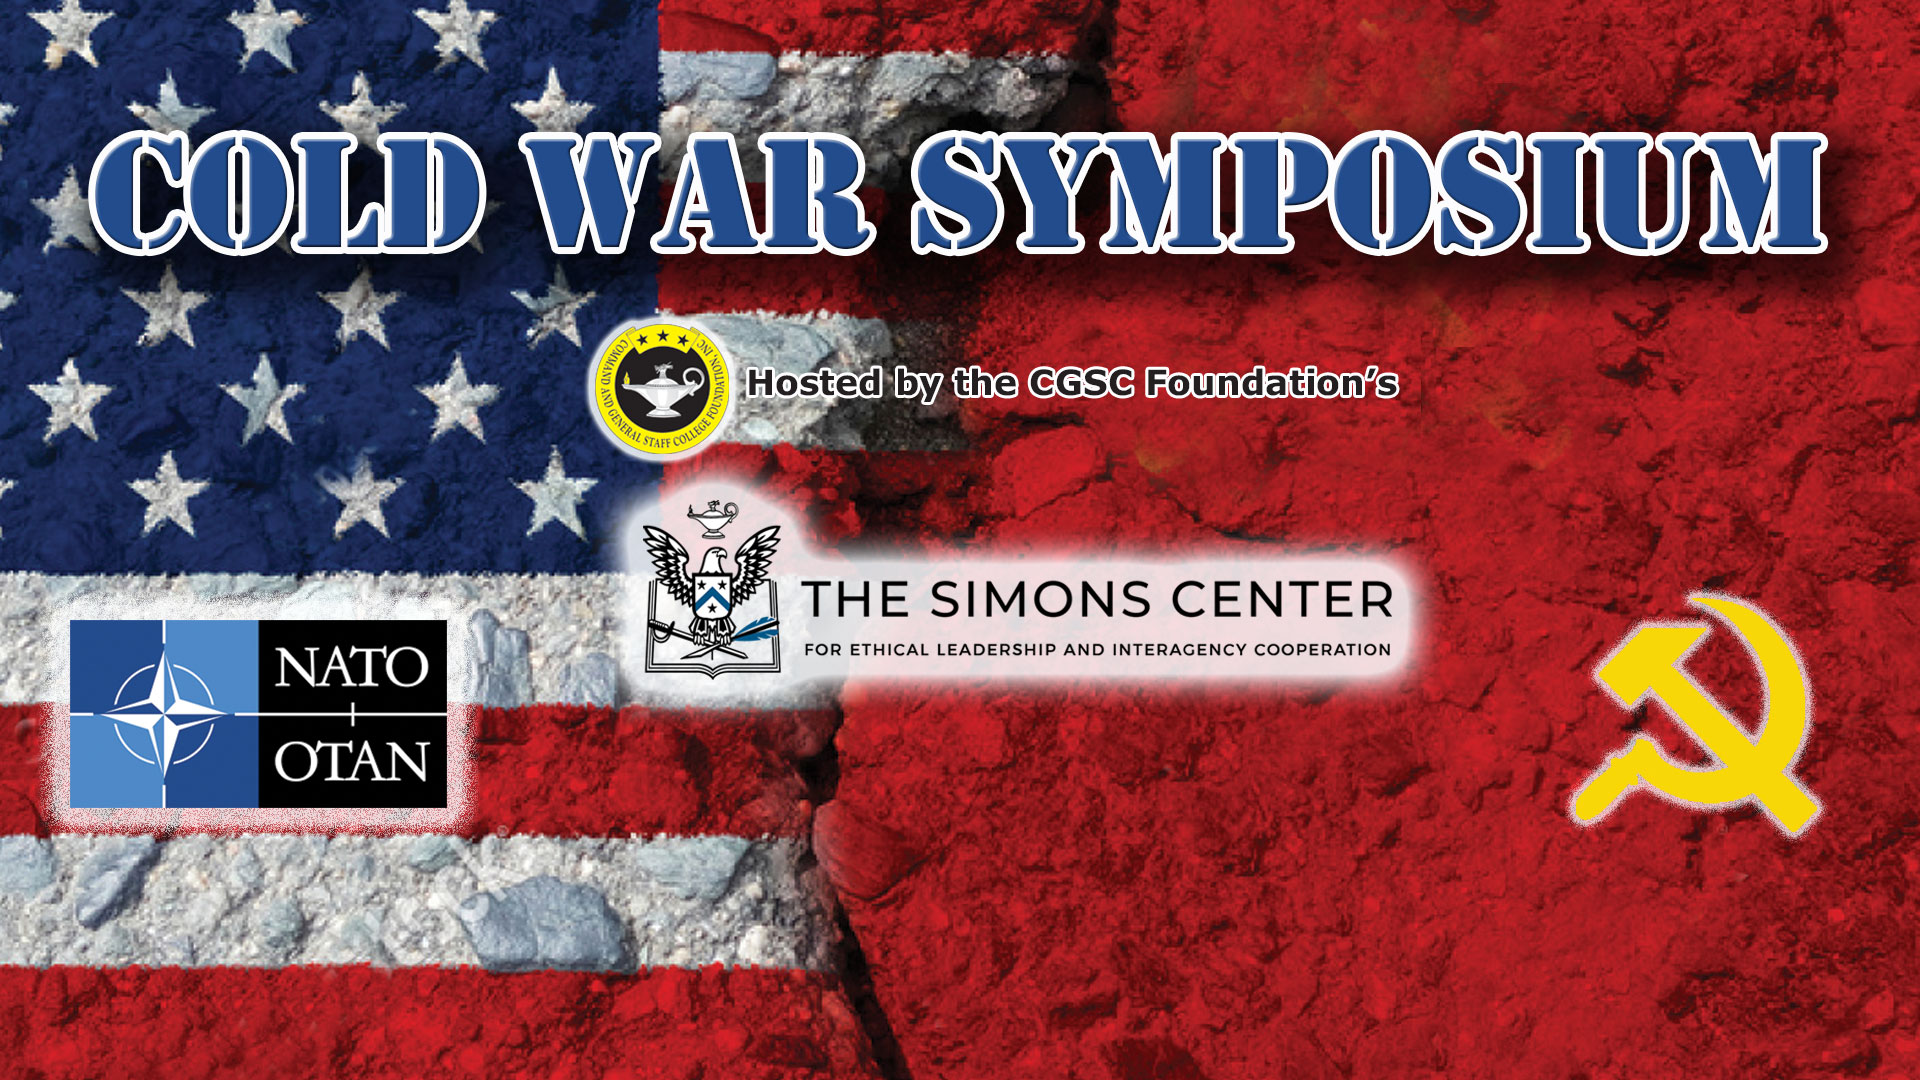 Cold War Symposium composite image with the US and USSR flags in the background, NATO logo and Soviet Hammer and Sickle art over the background. "Cold War Symposium" text at the top over CGSC Foundation and Simons Center logos. 